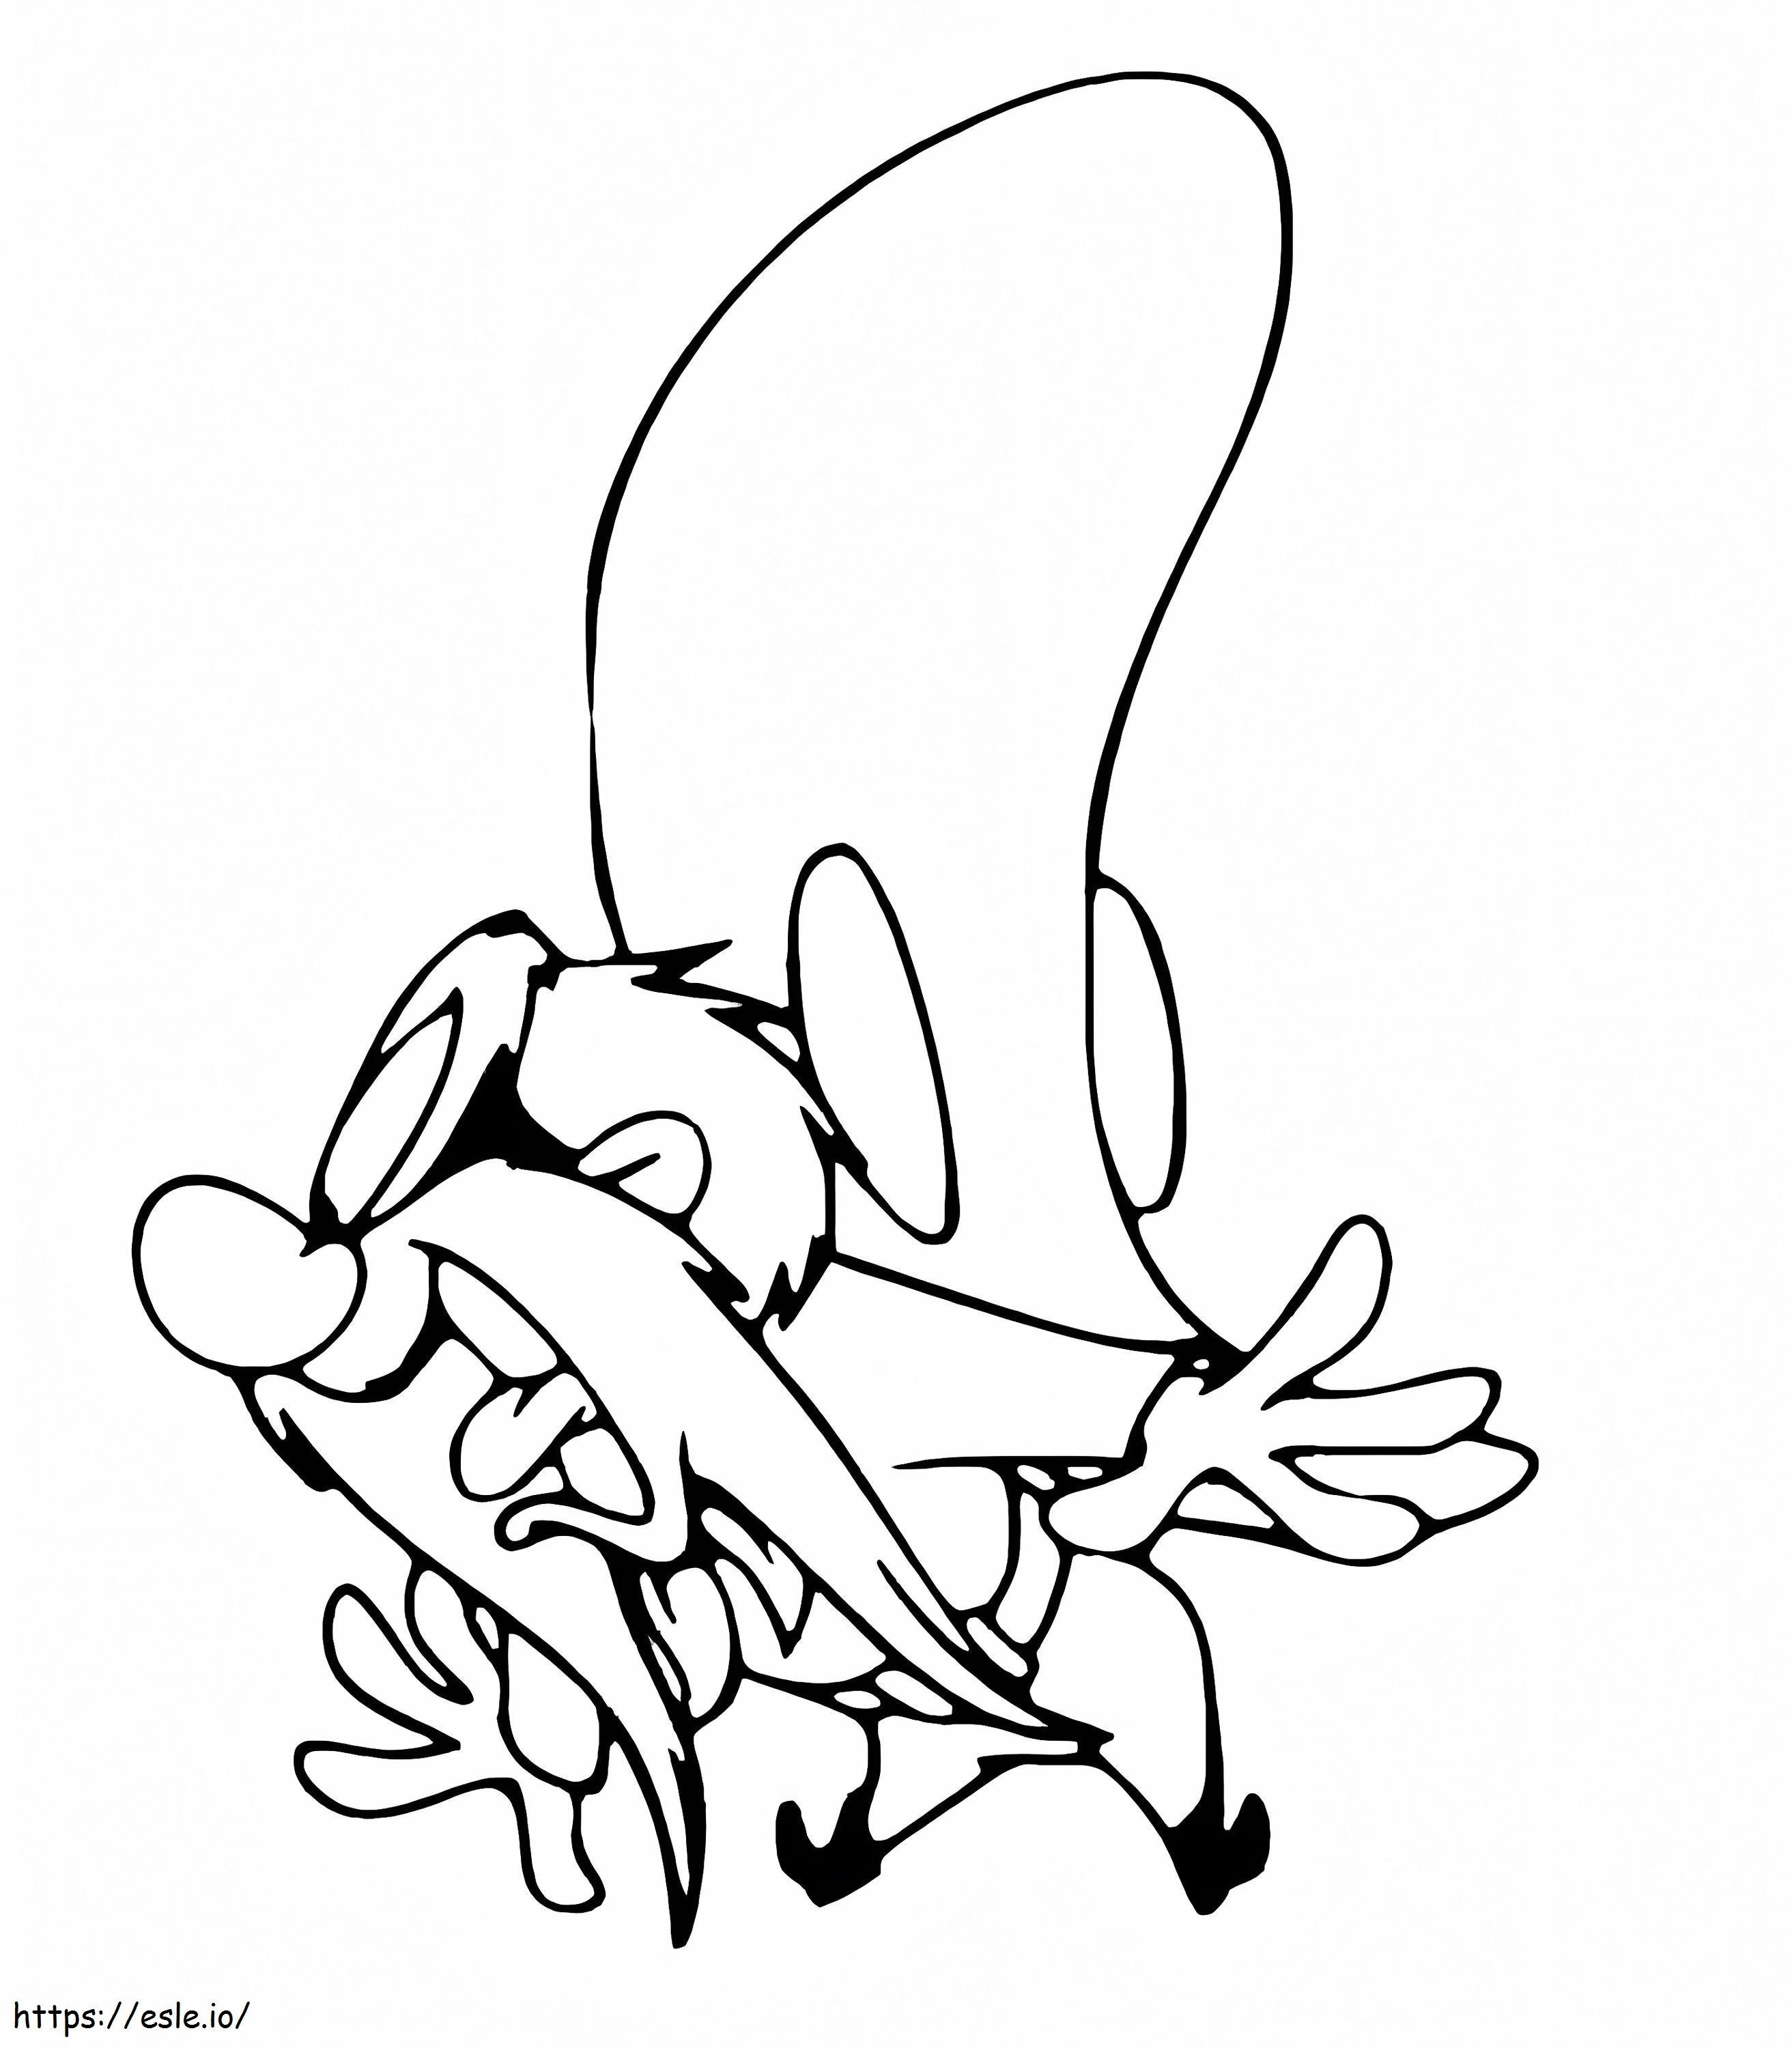 Yosemite Sam Is Scary coloring page